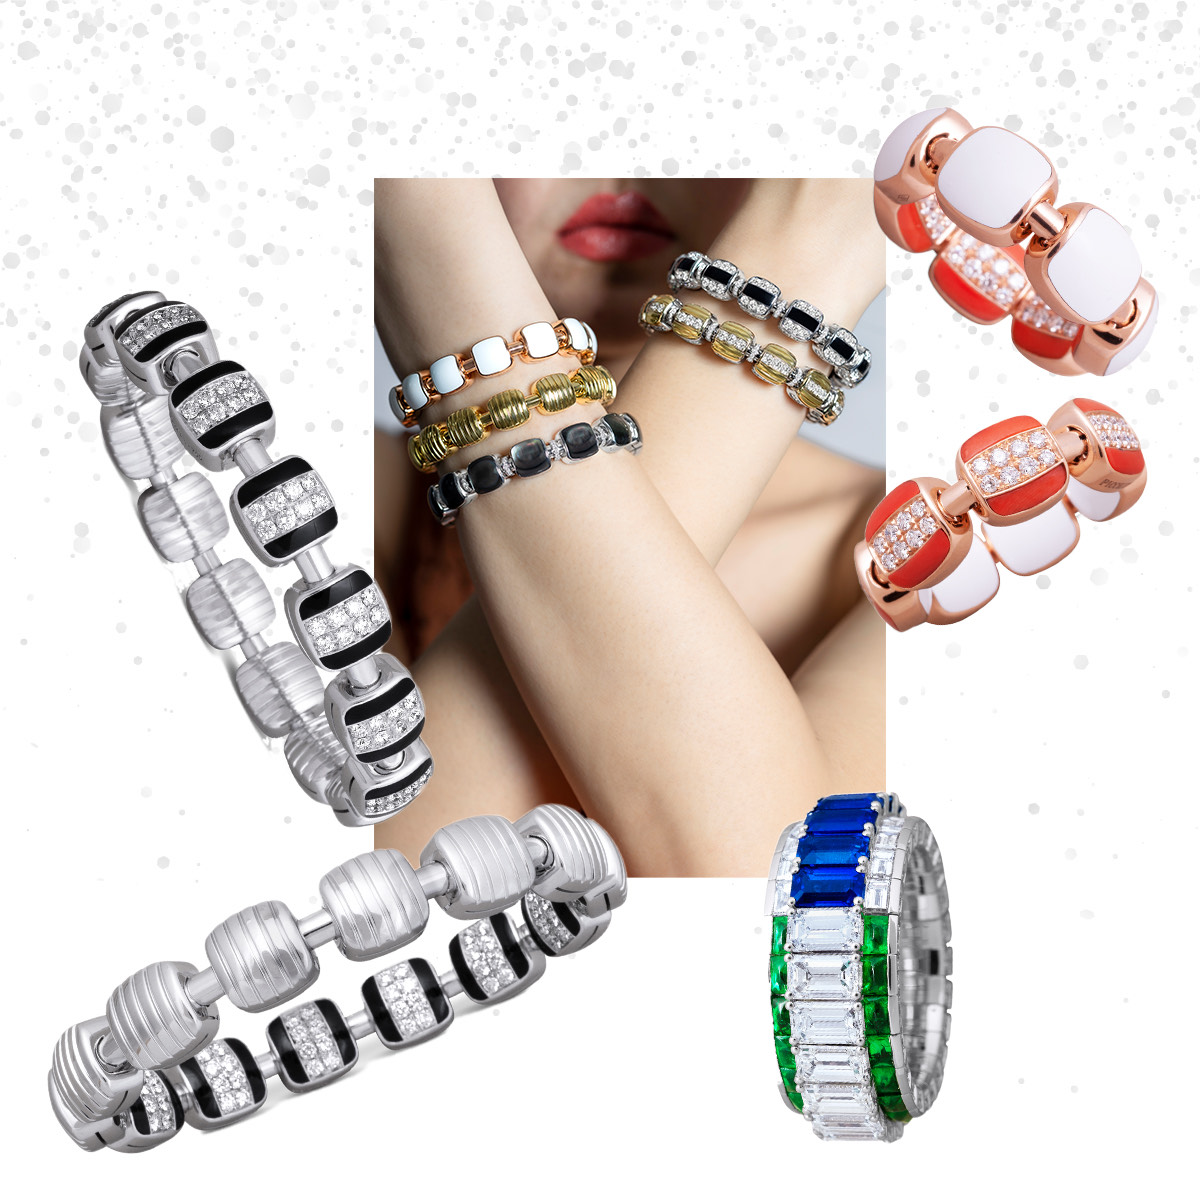 Clockwise from Upper Right – PICCHIOTTI Xpandable Reversible Coral and White Ceramic rings, PICCHIOTTI Xpandable Double Facing ring, PICCHIOTTI Xpandable Reversible White Gold, Black Onyx, and Diamond bracelet, Model wearing various Xpandable Reversible bracelets